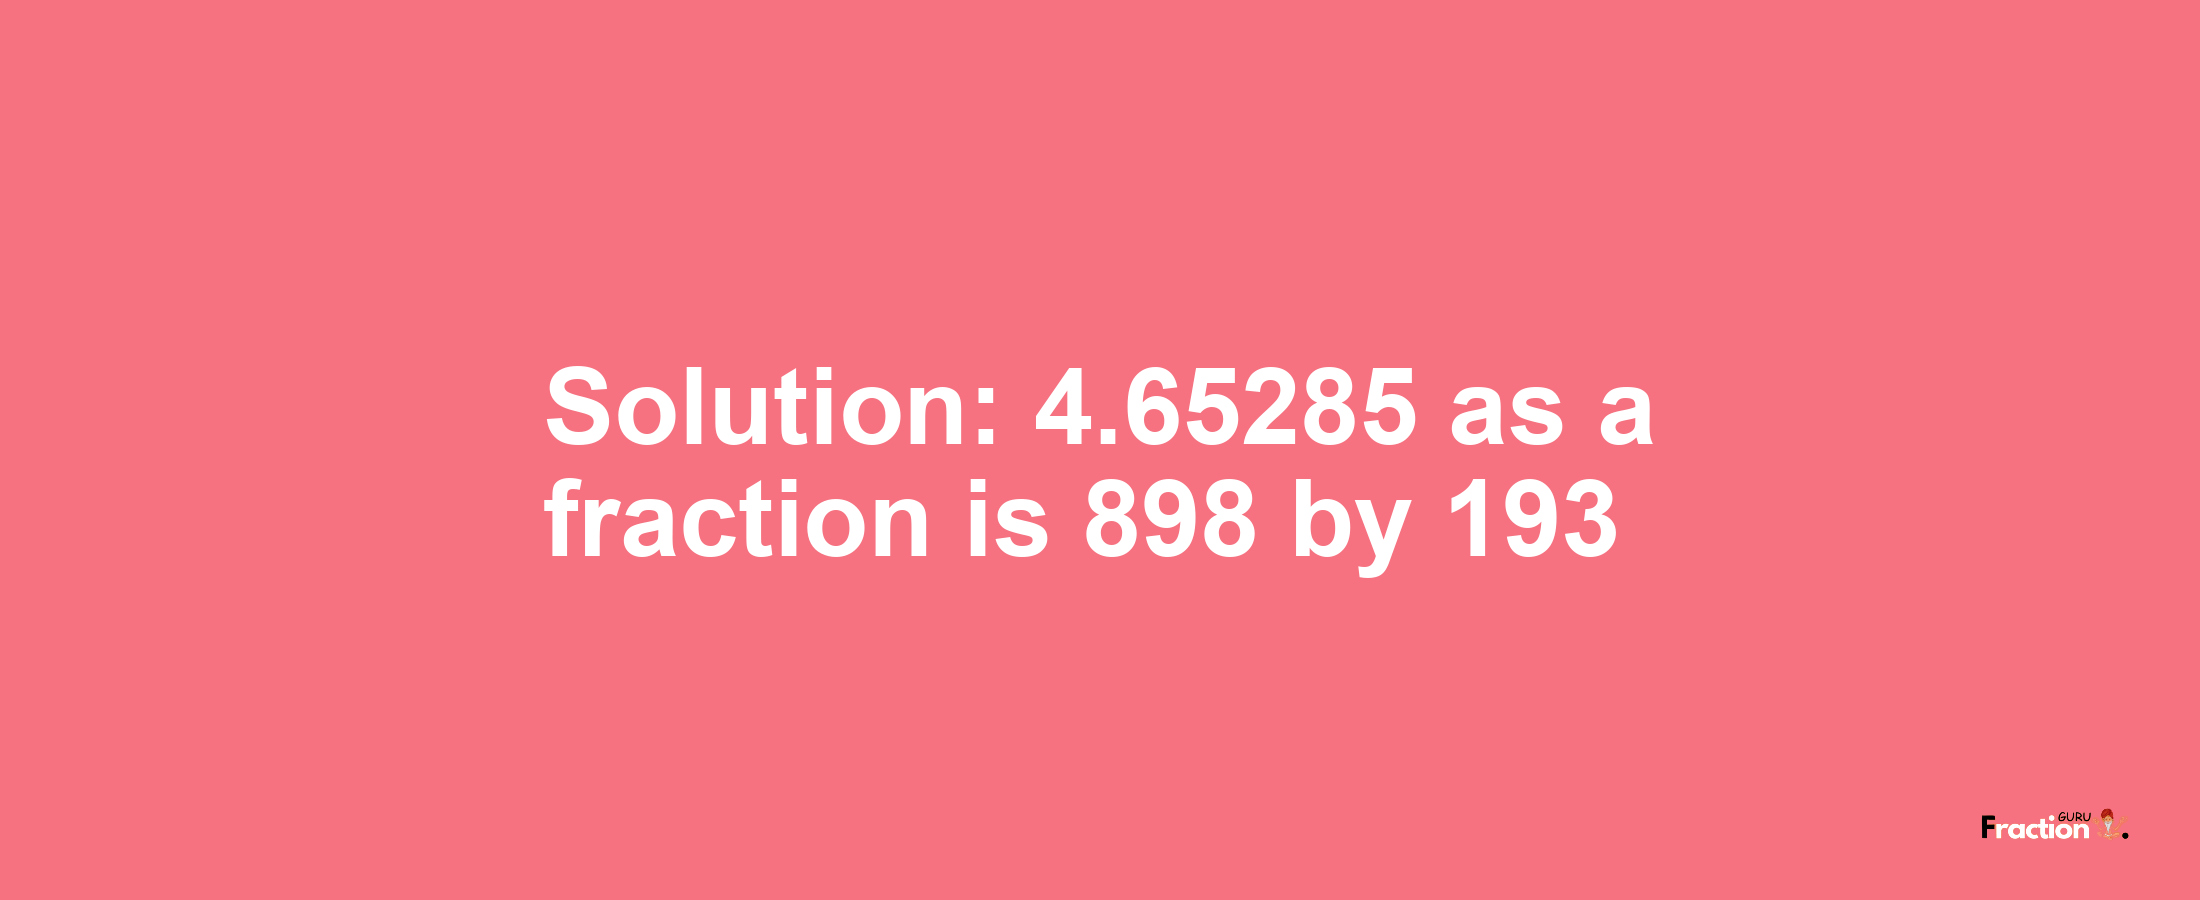 Solution:4.65285 as a fraction is 898/193